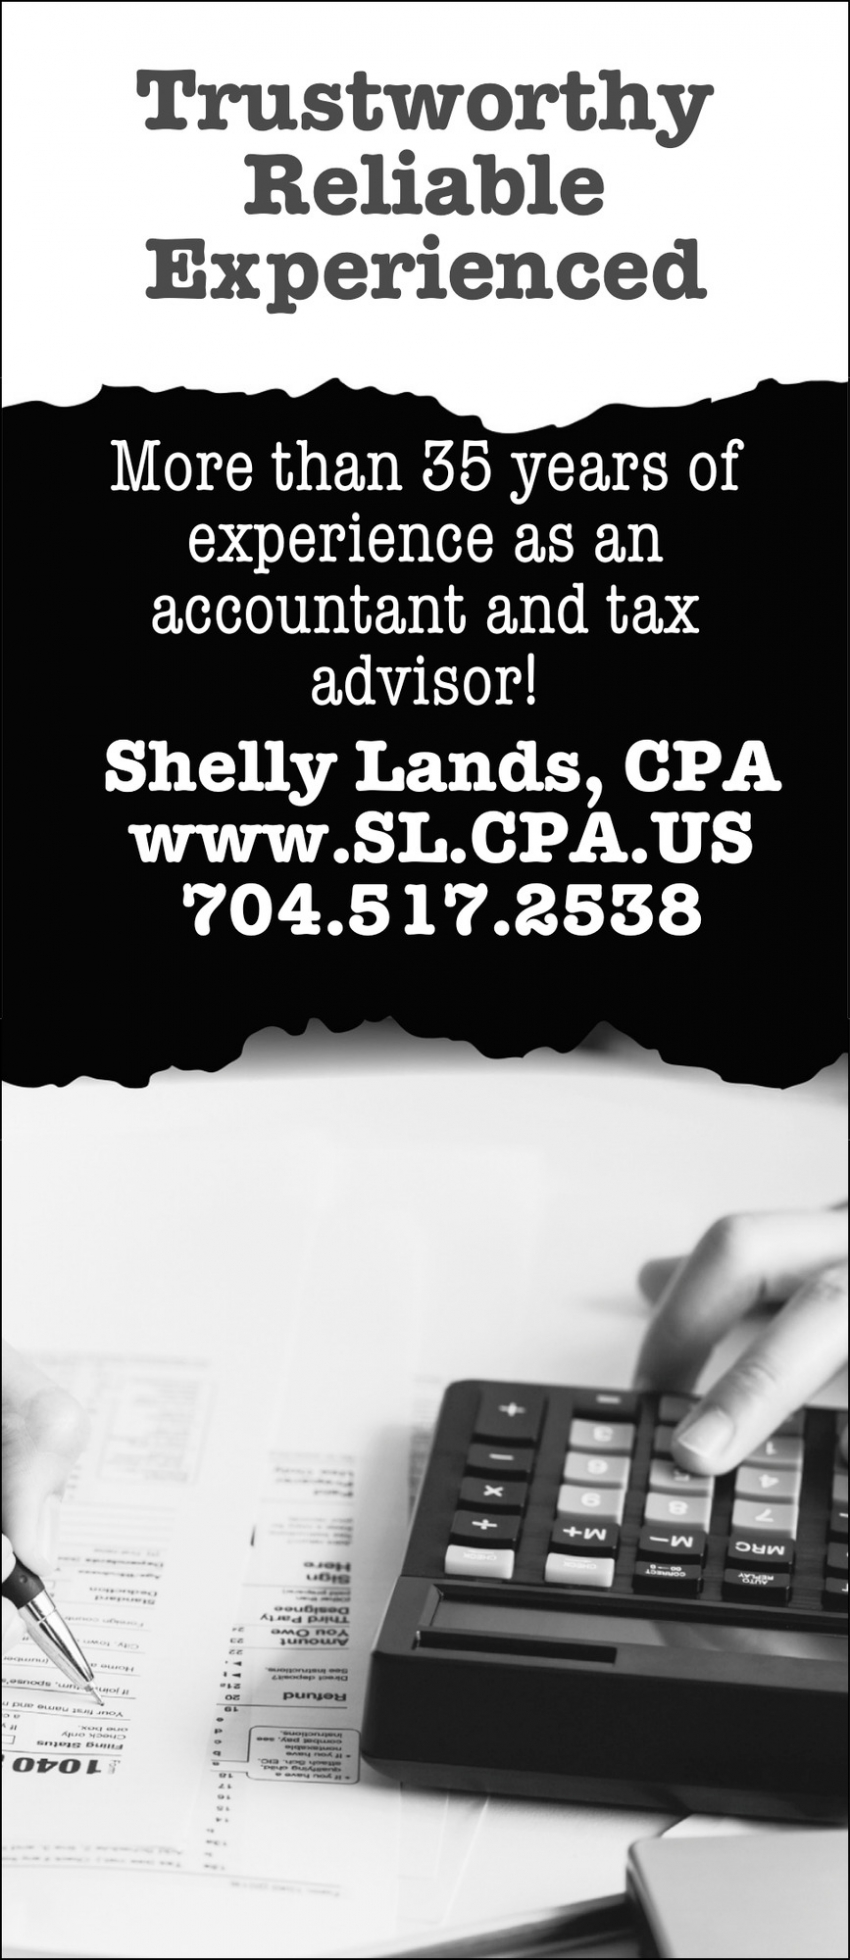 Shelly Lands, CPA